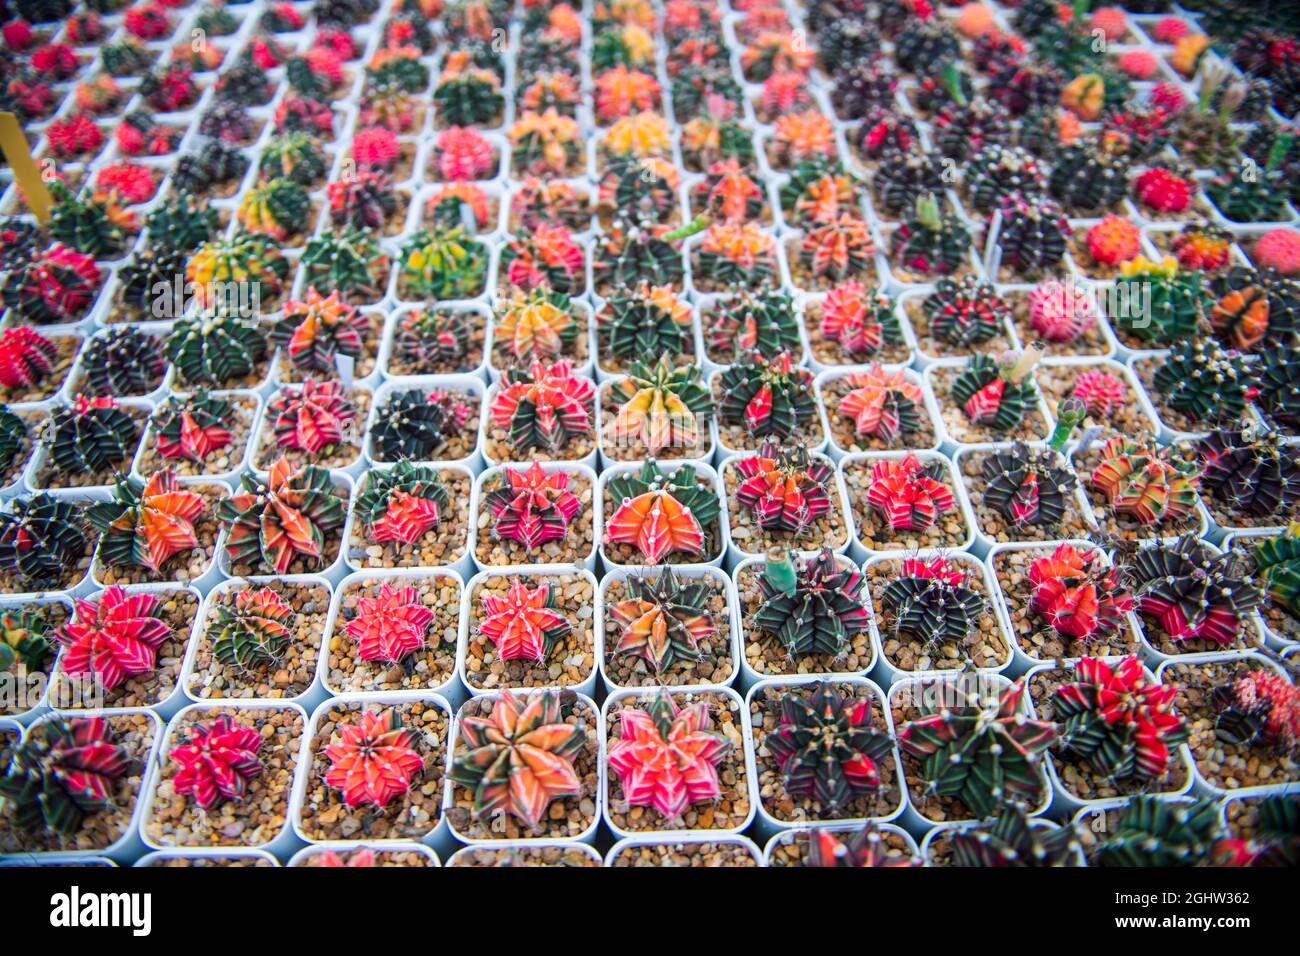 Close-Up of multi coloured cacti growing in a greenhouse, Thailand Stock Photo